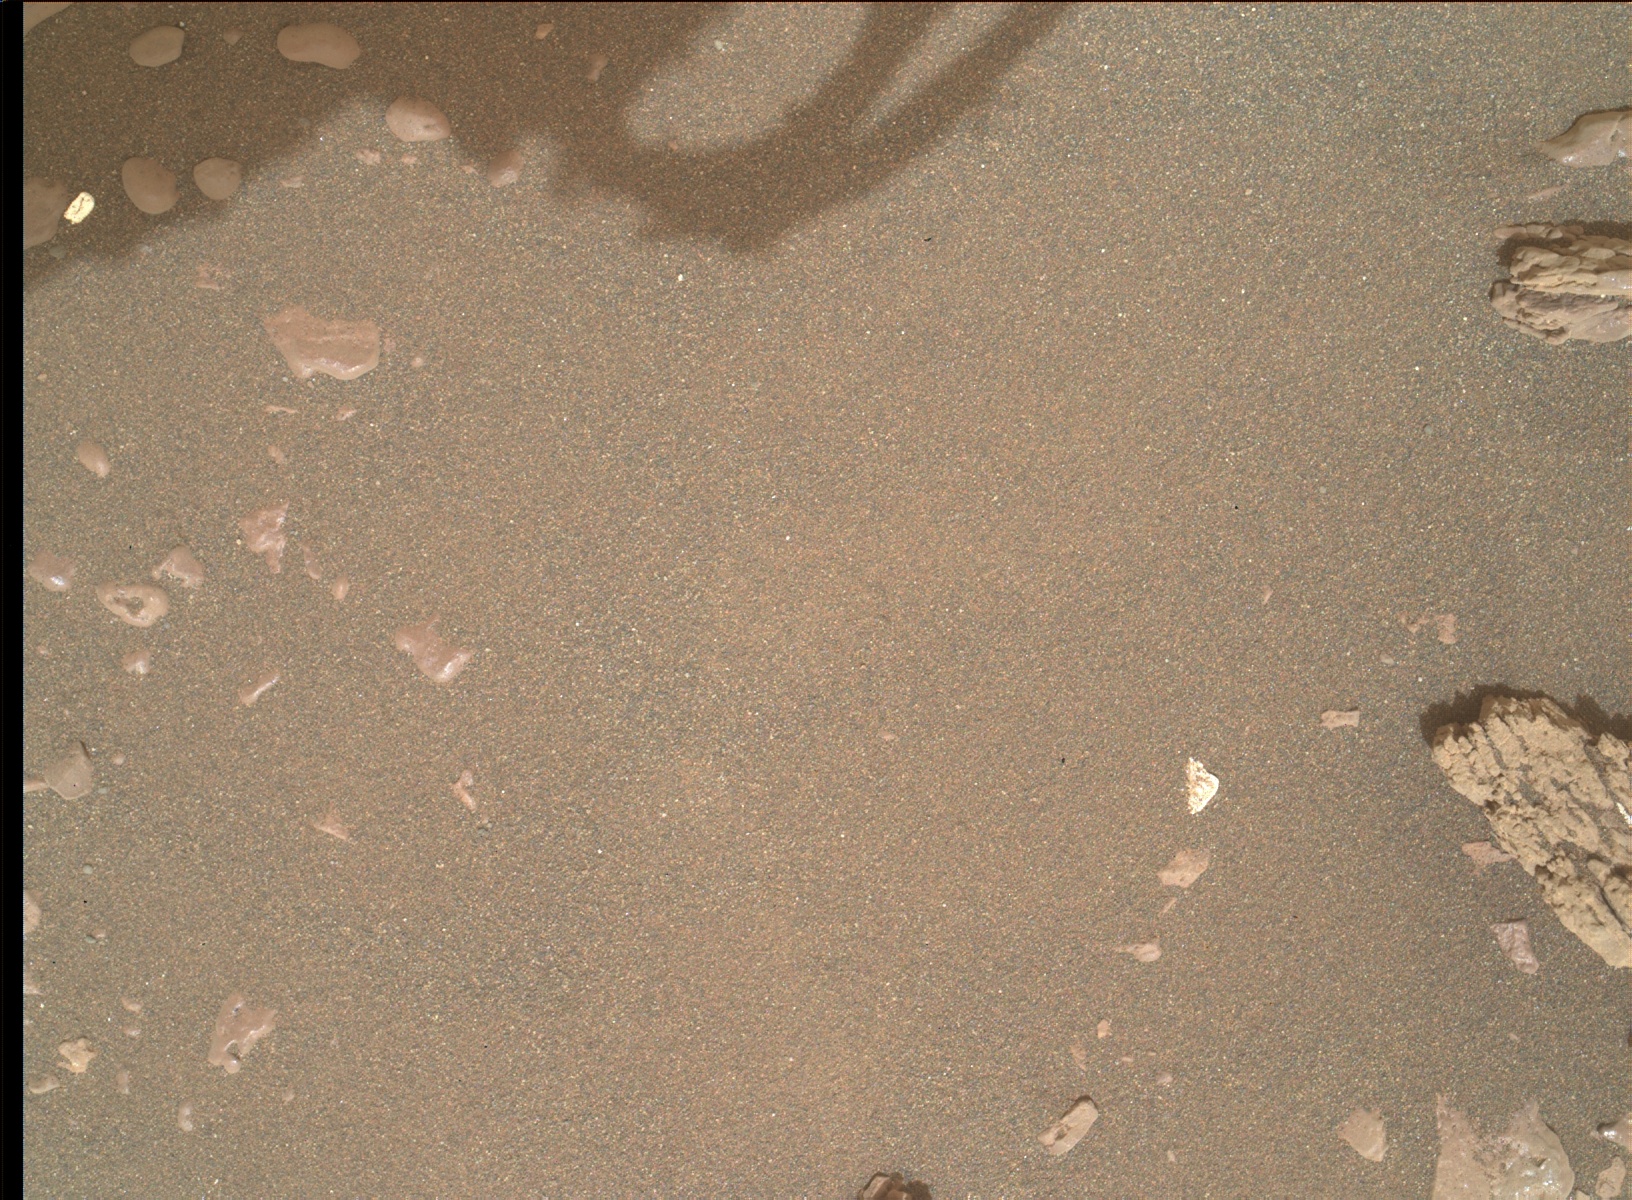 Nasa's Mars rover Curiosity acquired this image using its Mars Hand Lens Imager (MAHLI) on Sol 2313